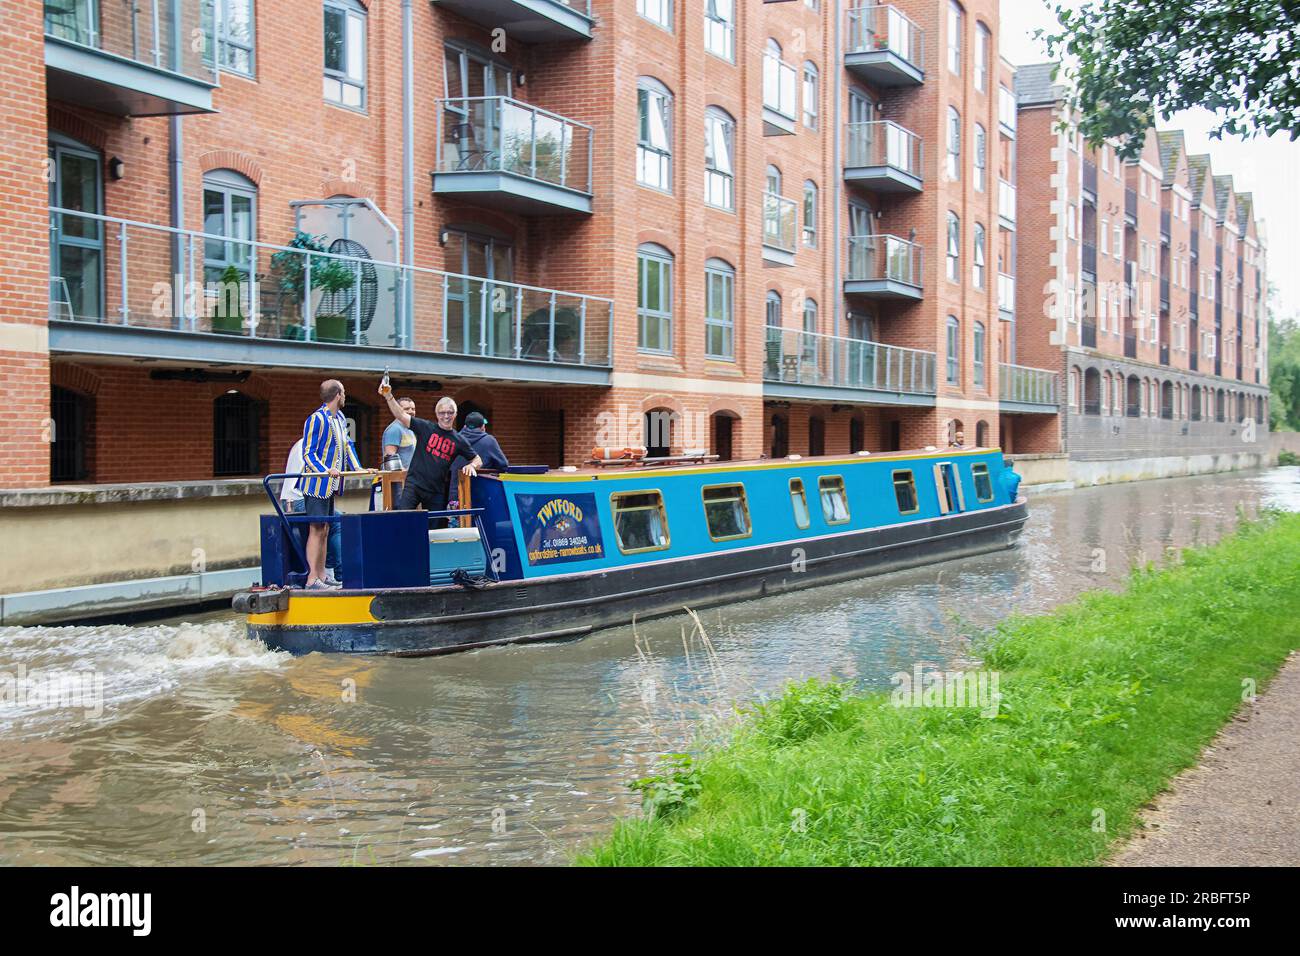 7-27-2019 Oxford England -Men partying on river boat on river passing overlooking apartments with one man wearing school jacket and shorts and another Stock Photo